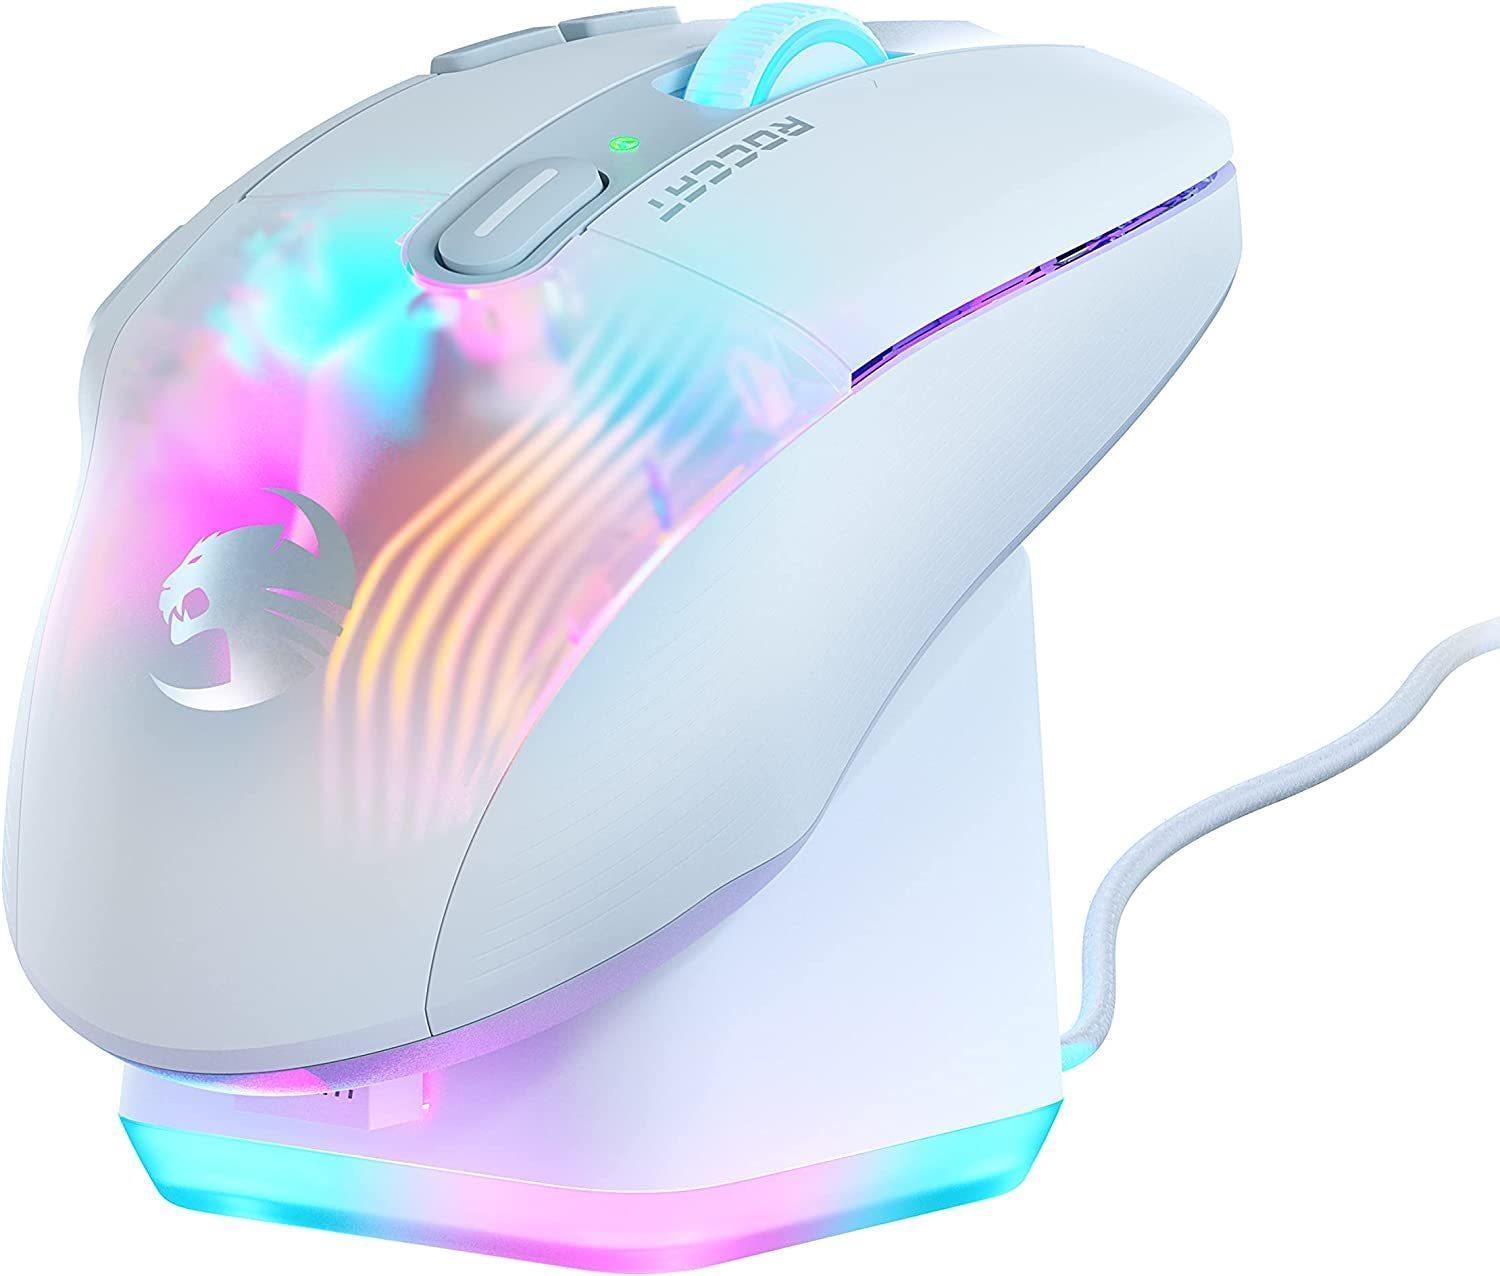 ROCCAT Kone XP Air Wireless Gaming Mouse (White)